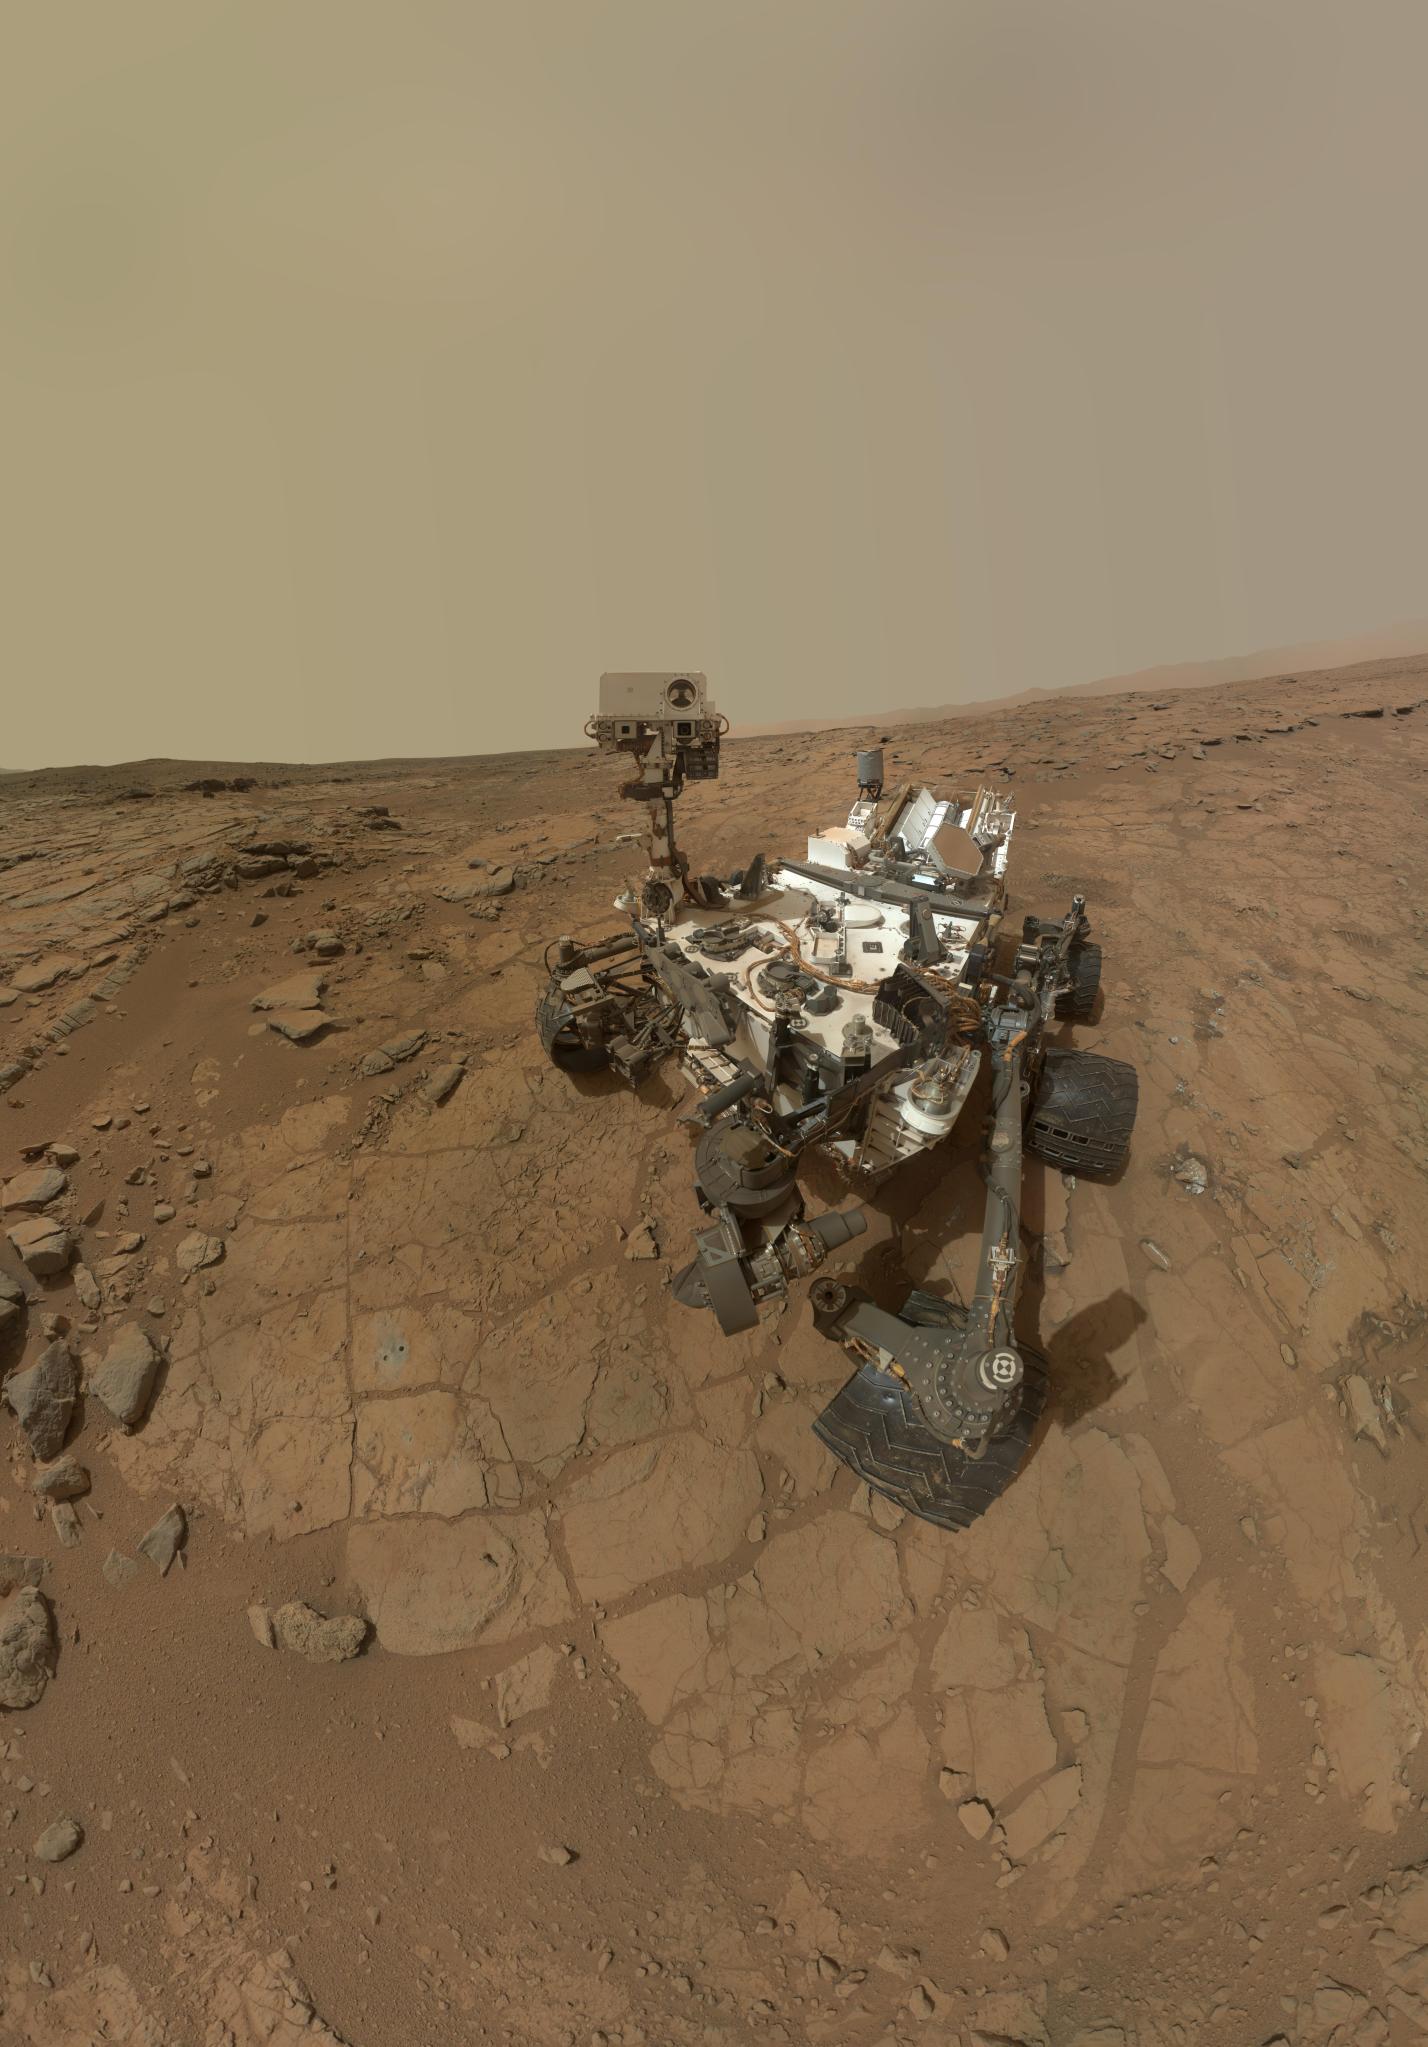 Image of Curiosity rover on Mars